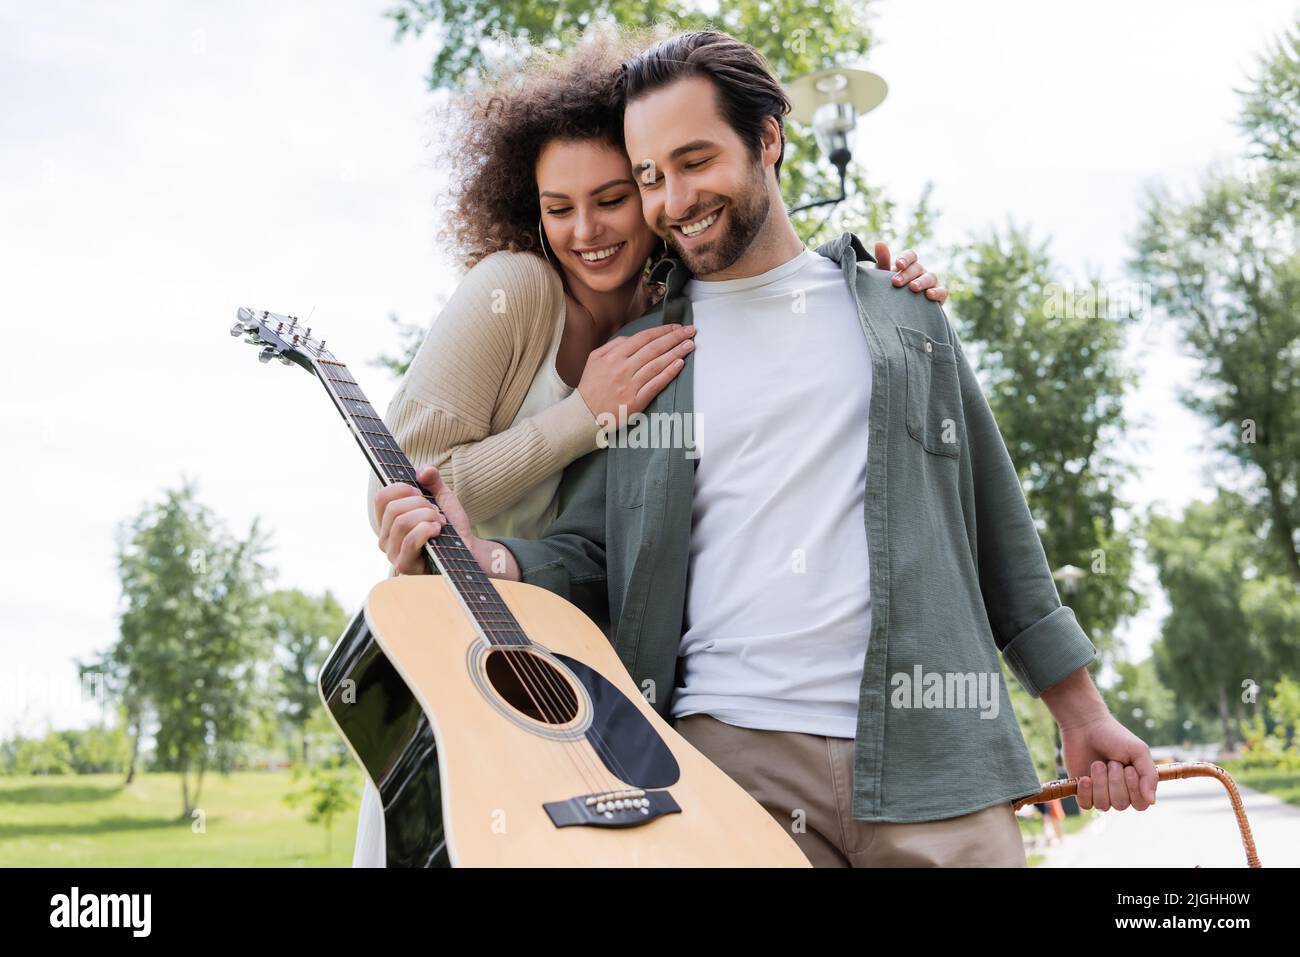 smiling man in summer clothes holding guitar near happy girlfriend in green park Stock Photo